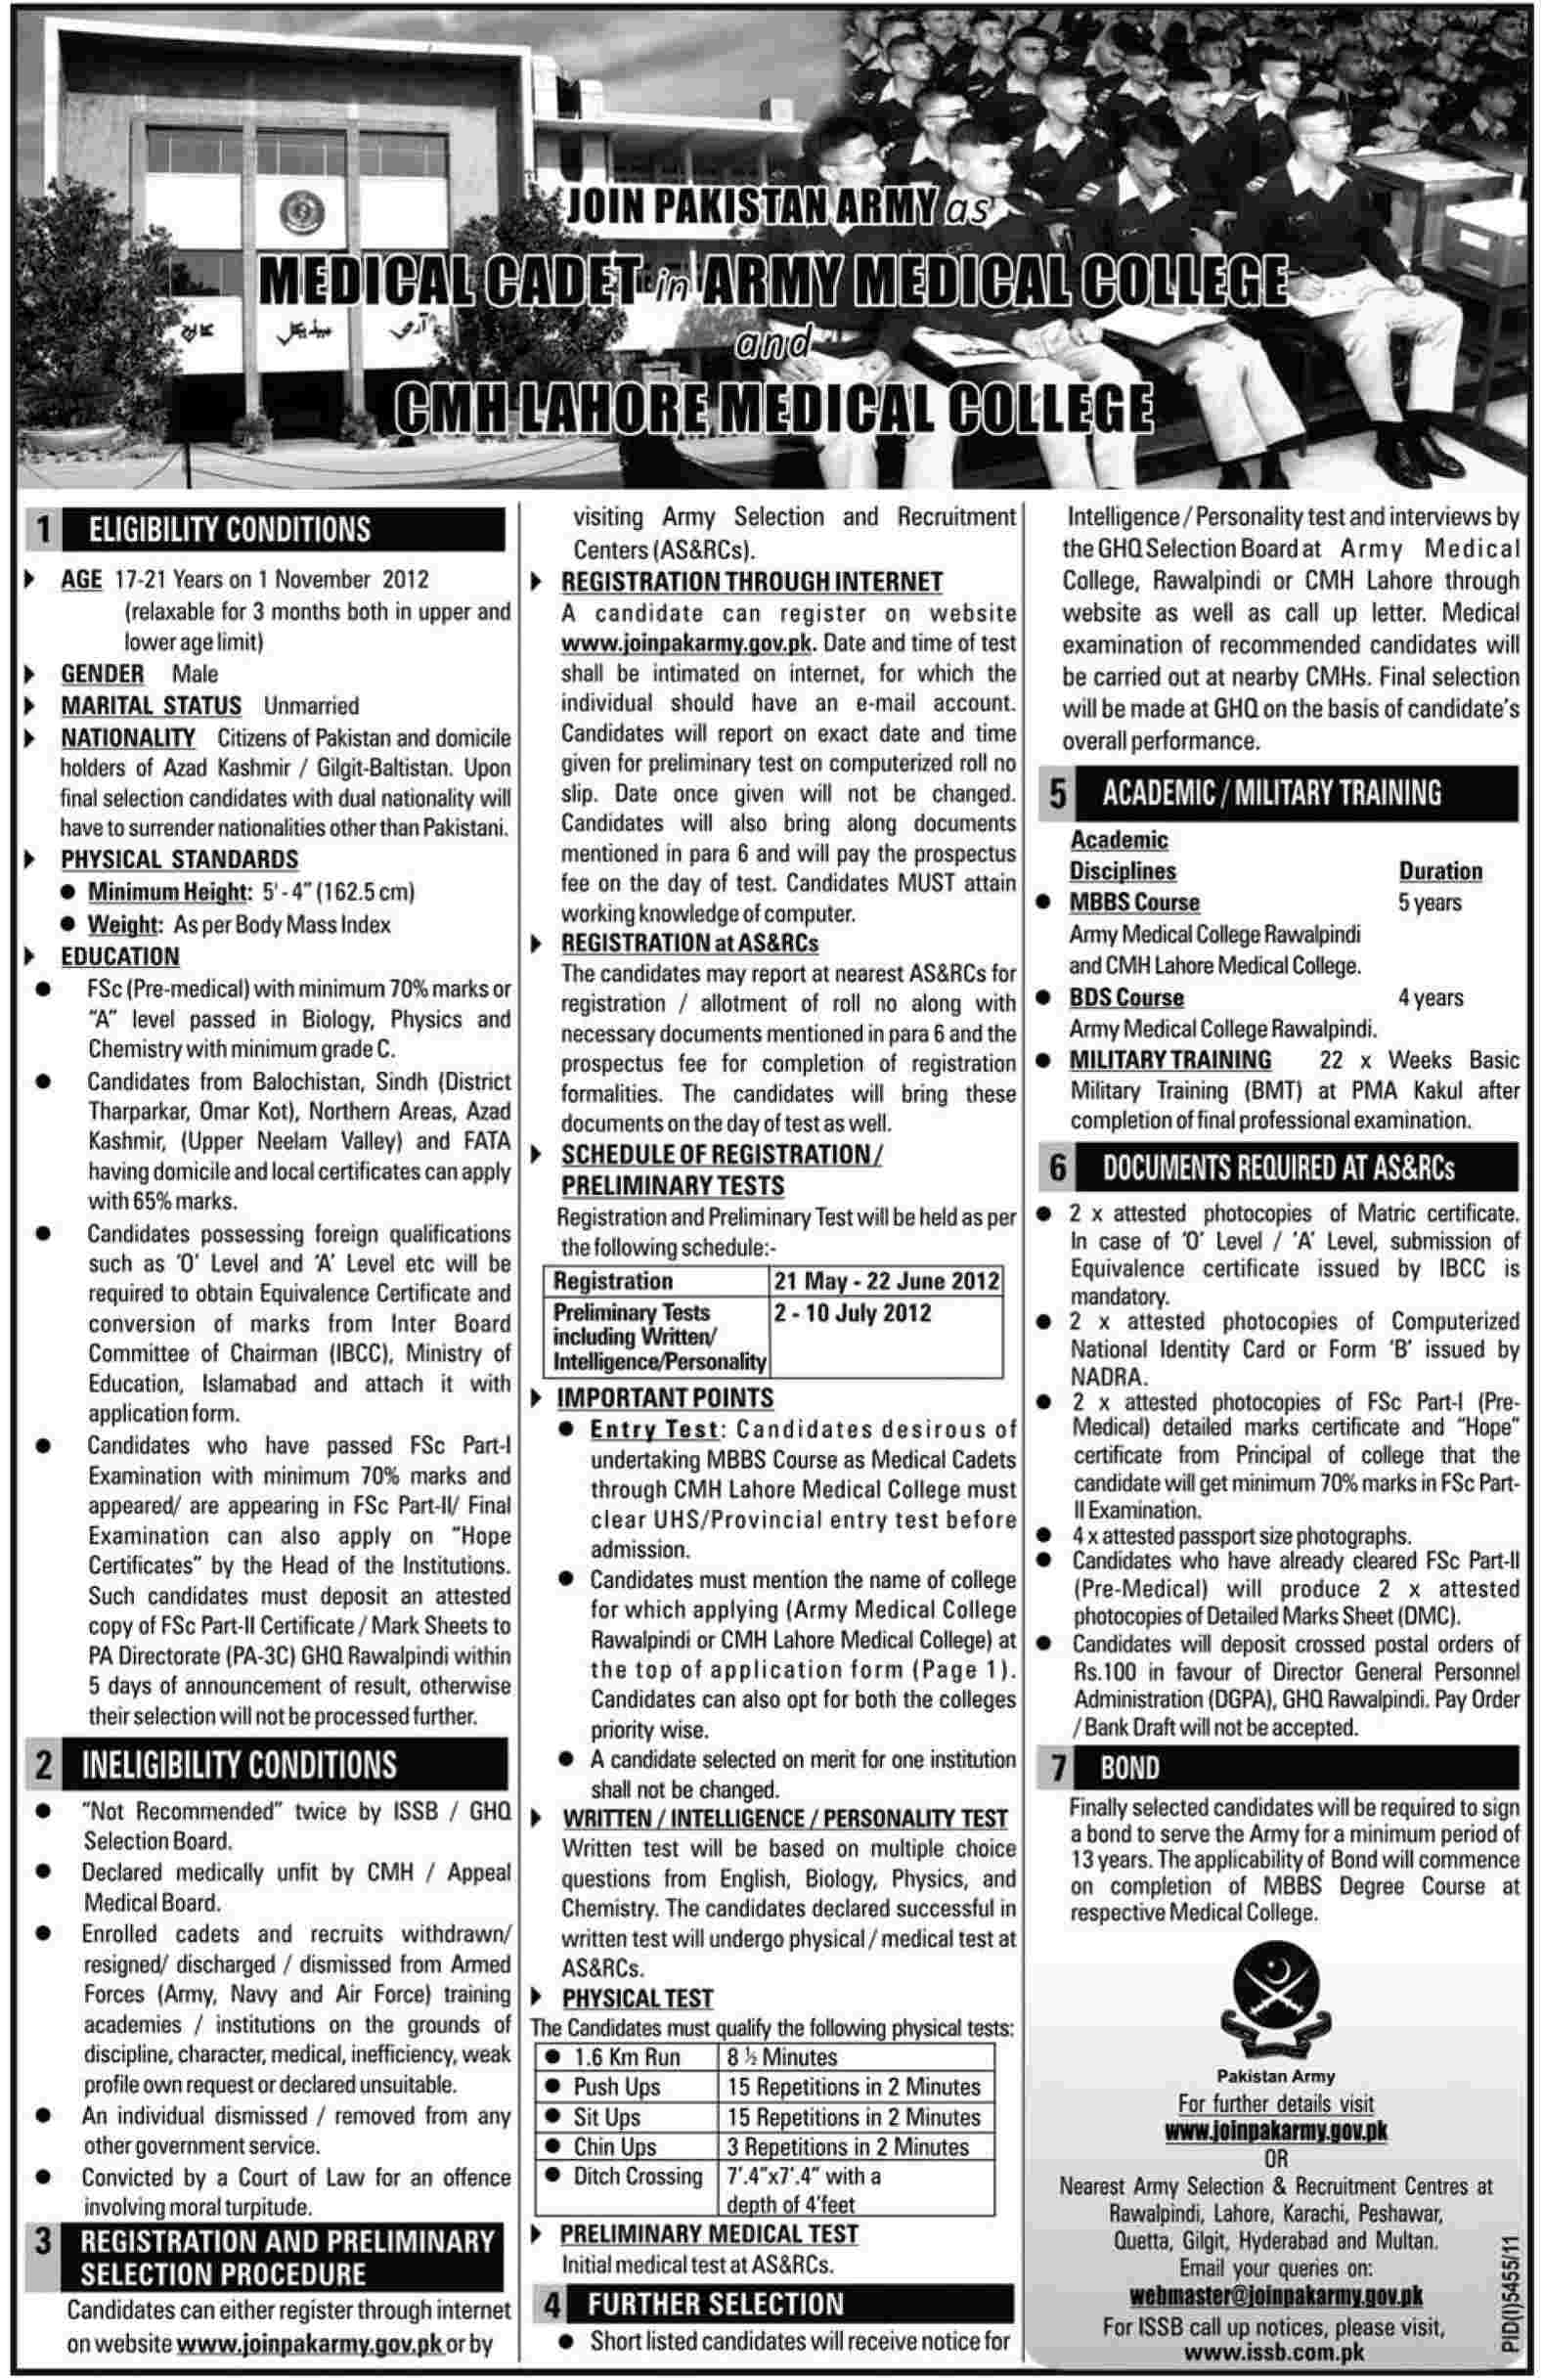 Join Pakistan Army as MEDICAL CADET